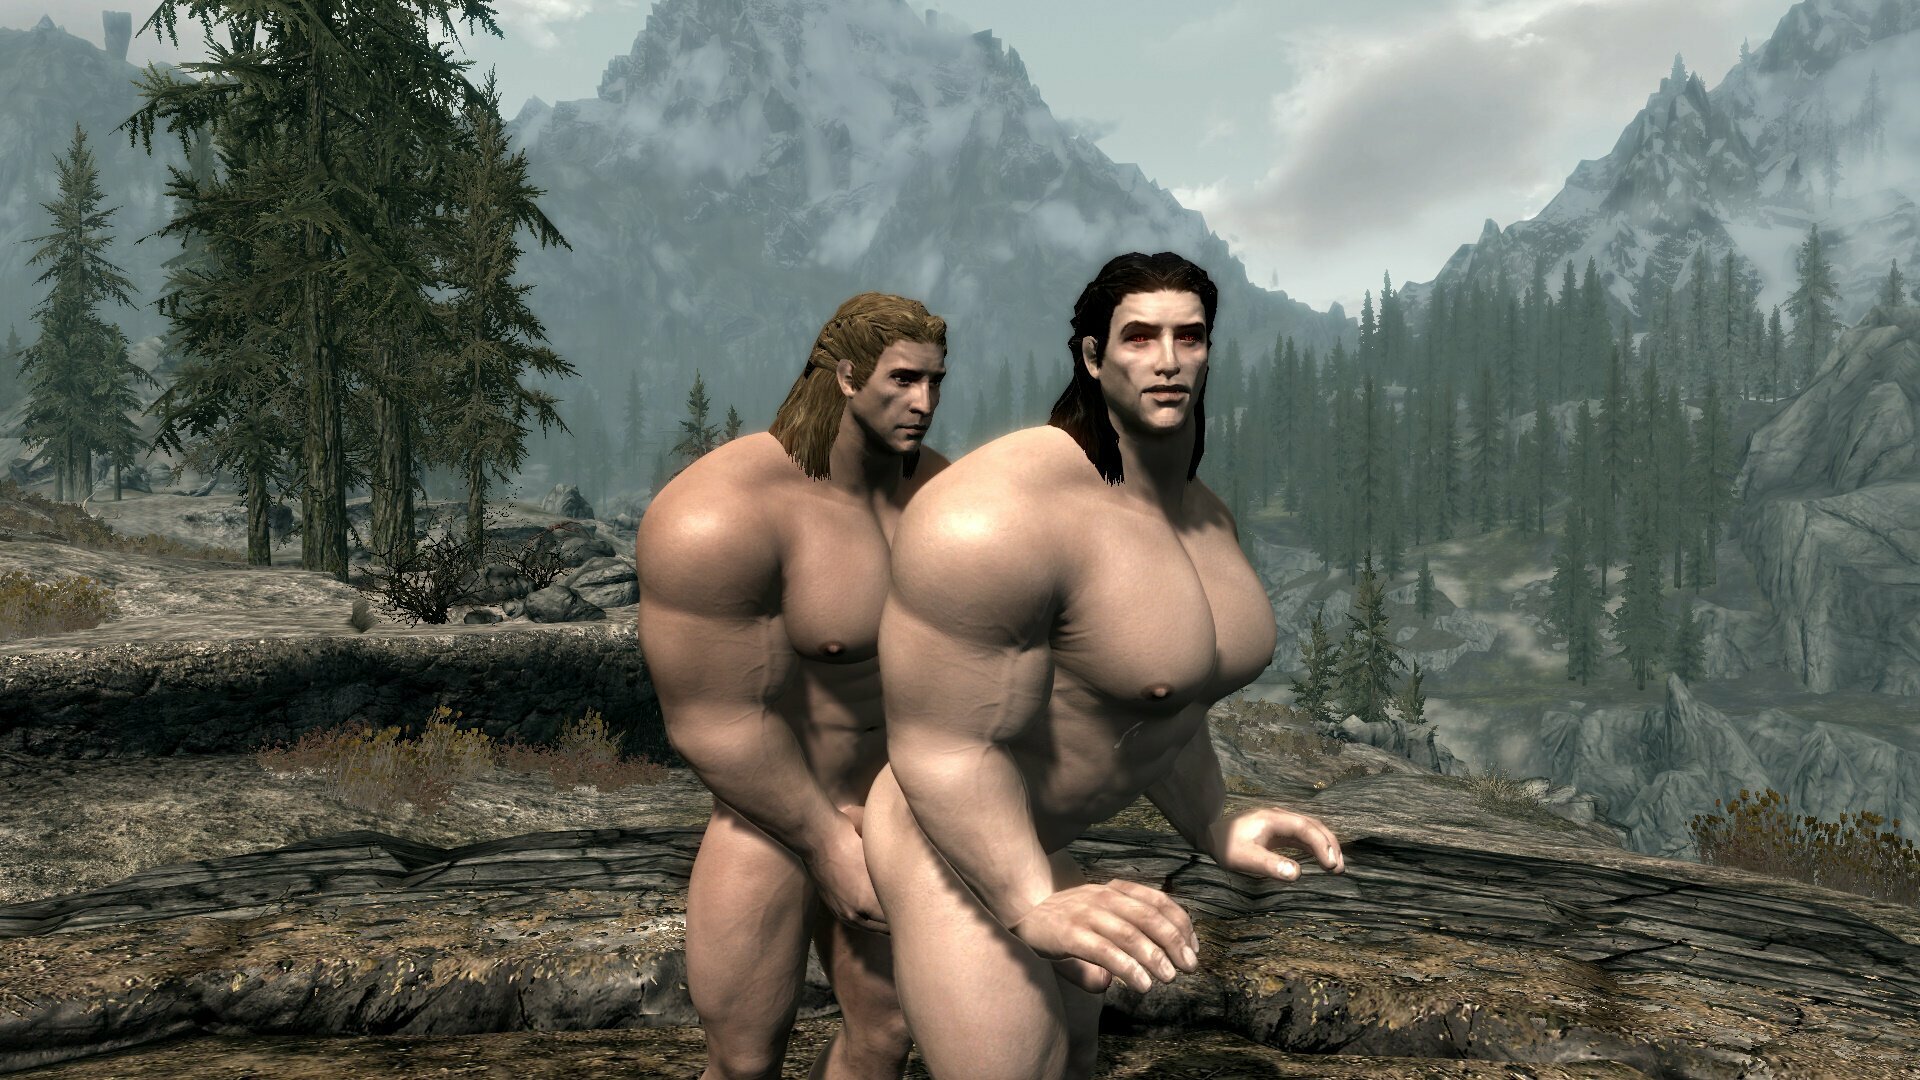 Gareth and Sven decided to have fun in nature after sex in a tavern 